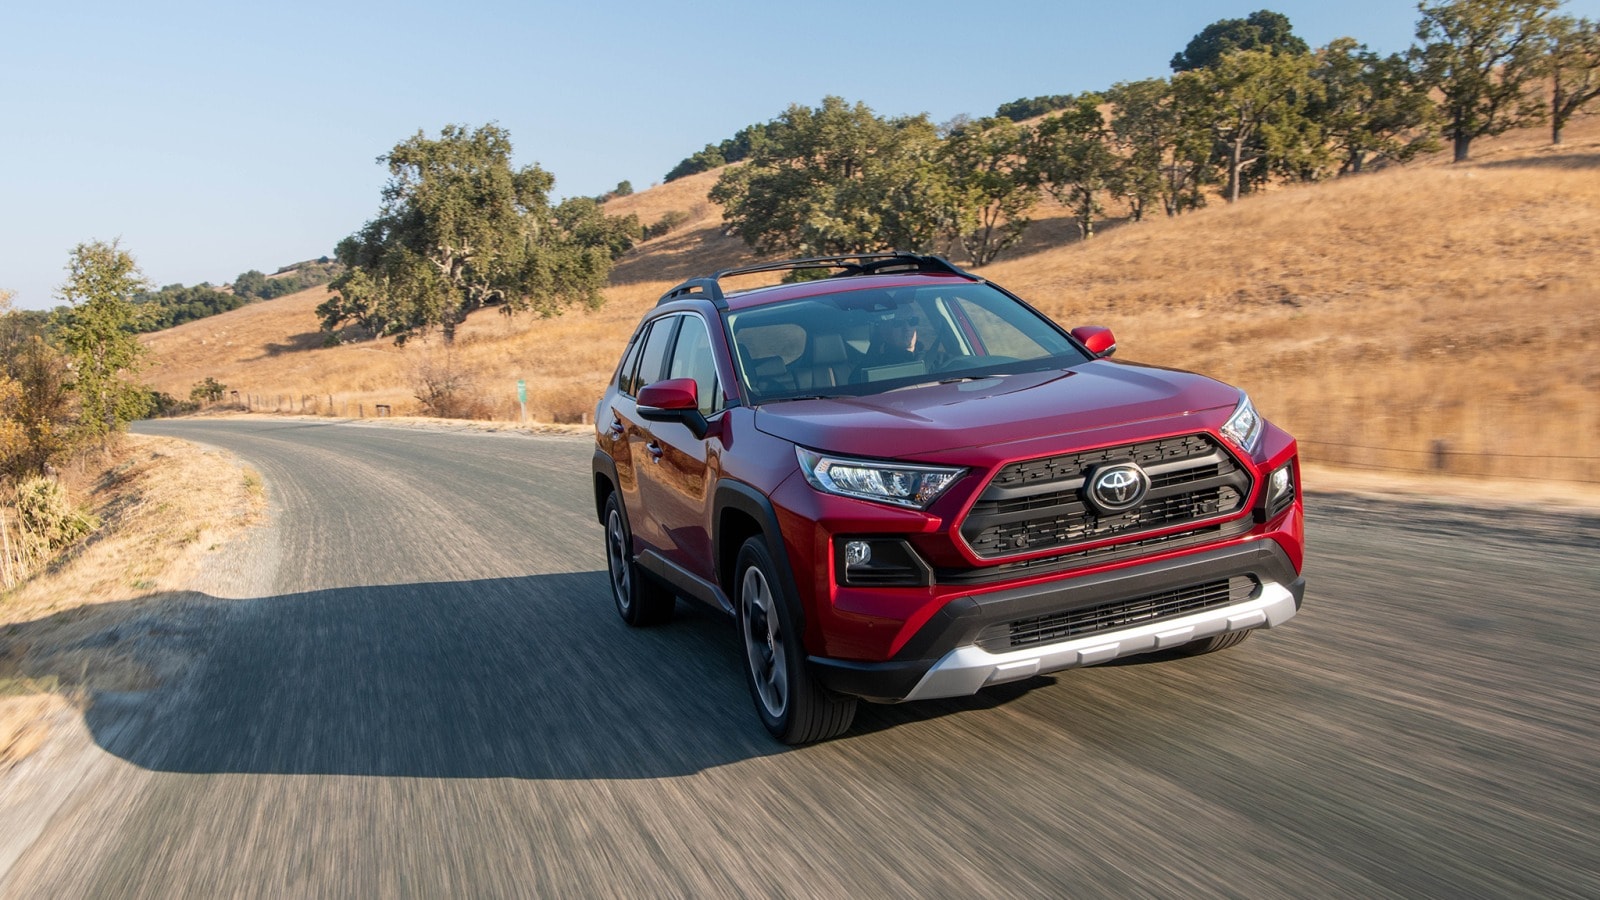 Best SUV With Great Gas Mileage: Top Fuel-Efficient Options